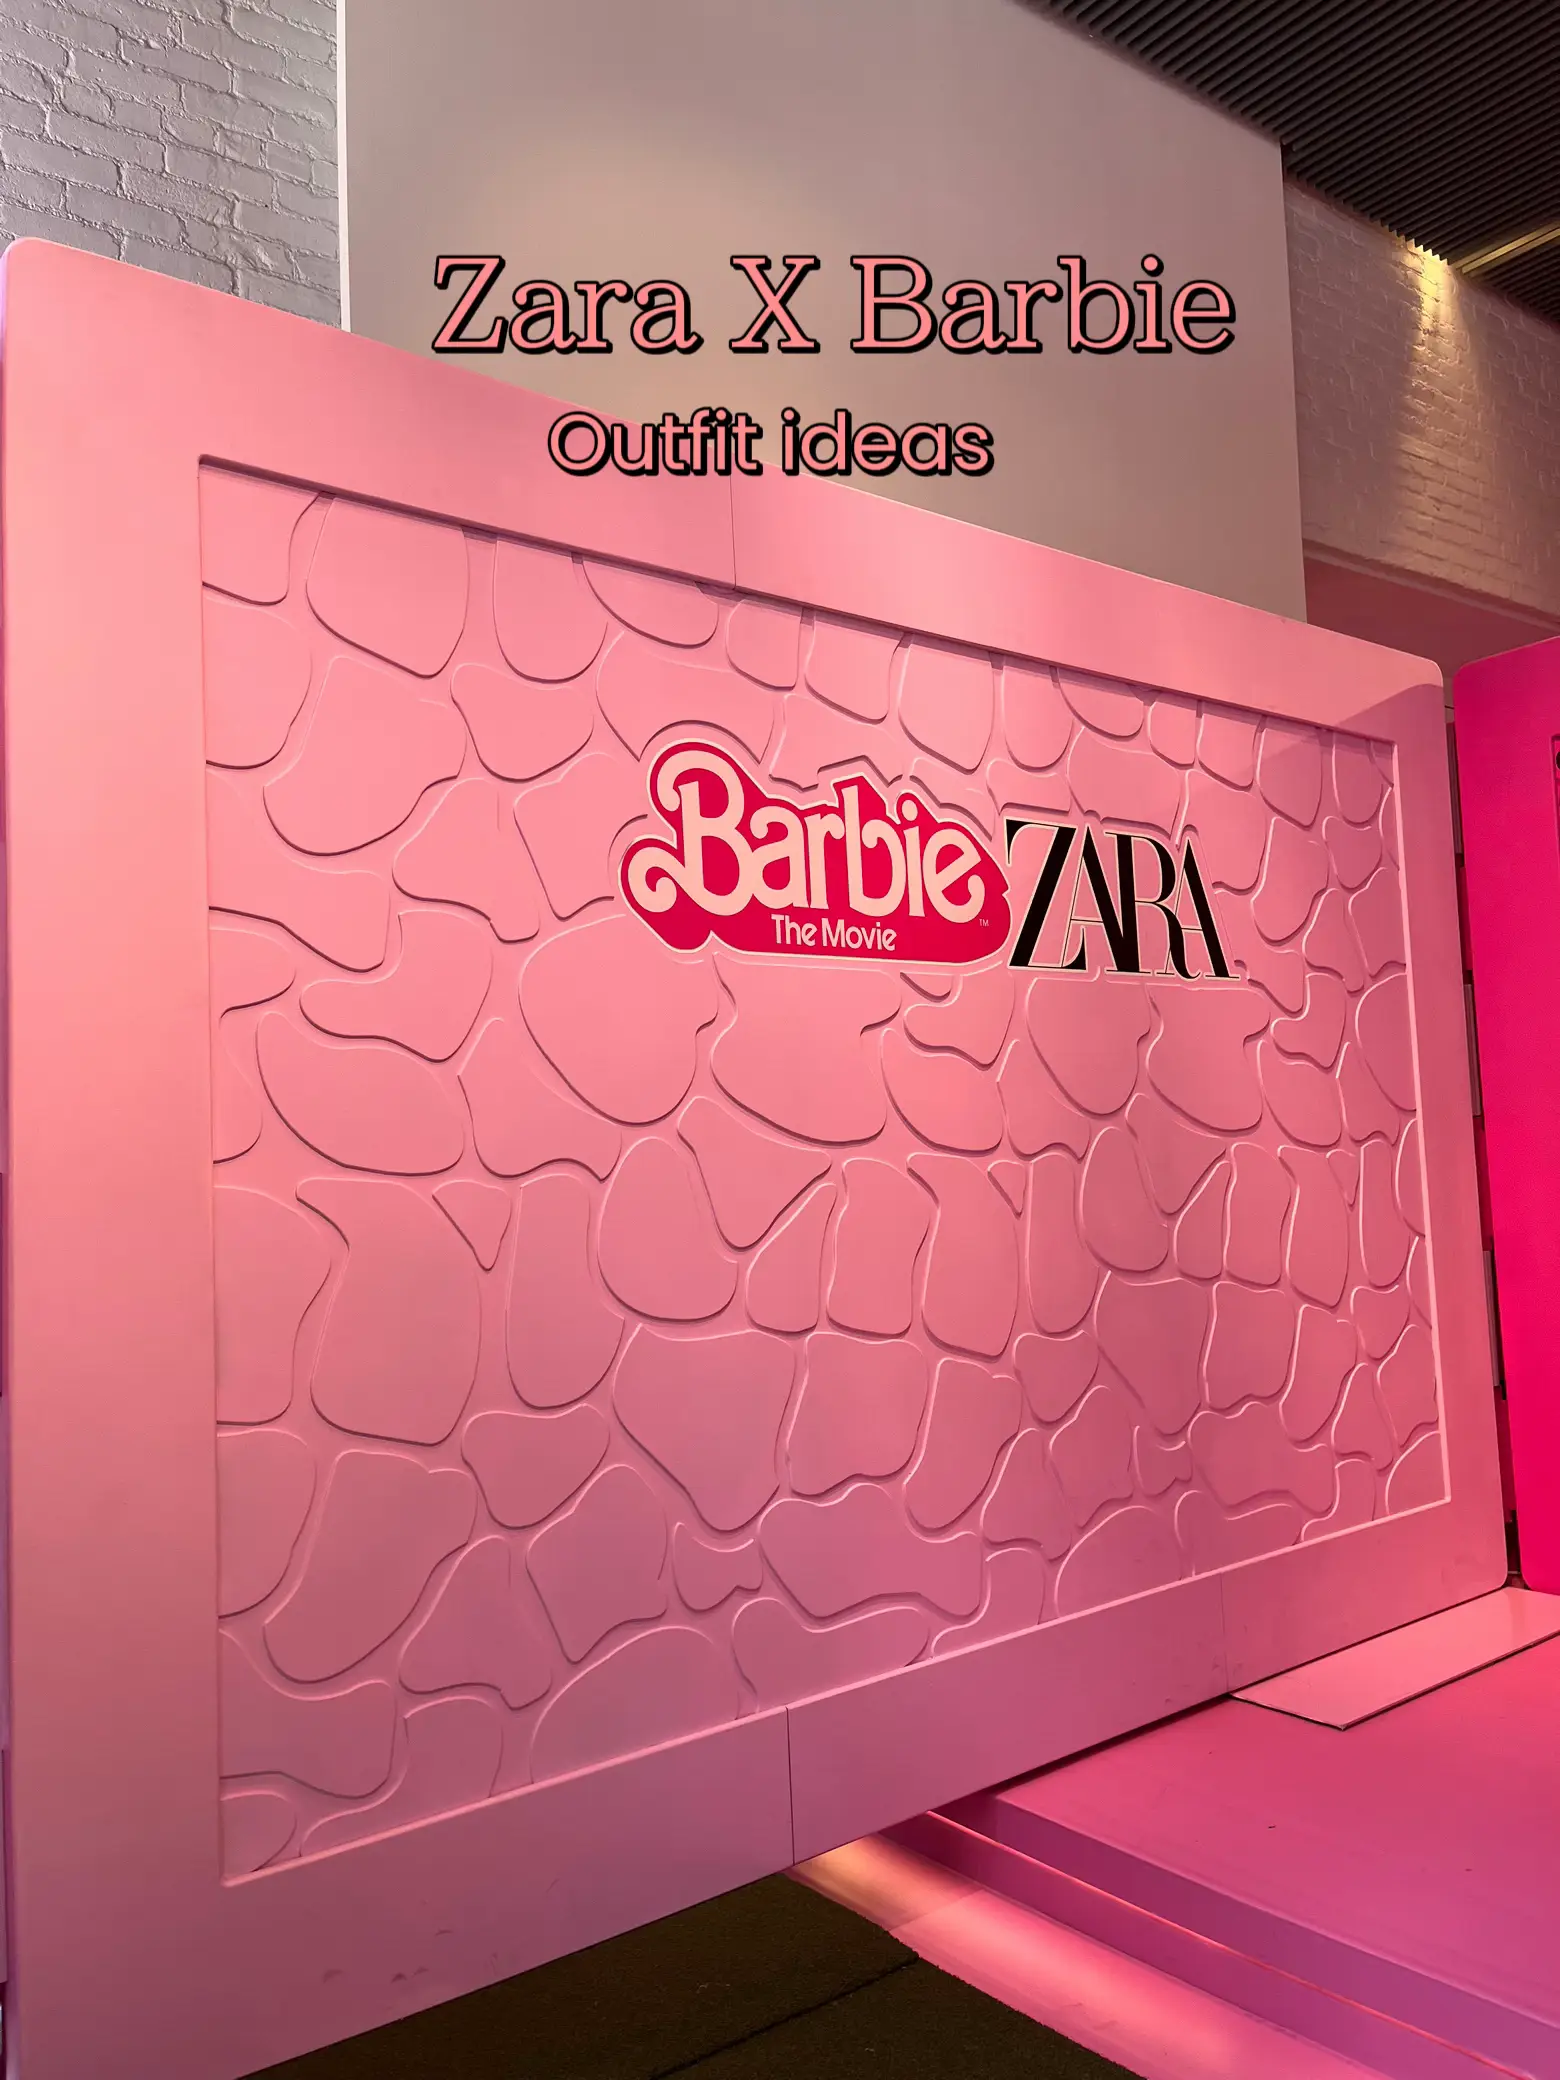 Zara x barbie outfit ideas💗, Gallery posted by Tianakori